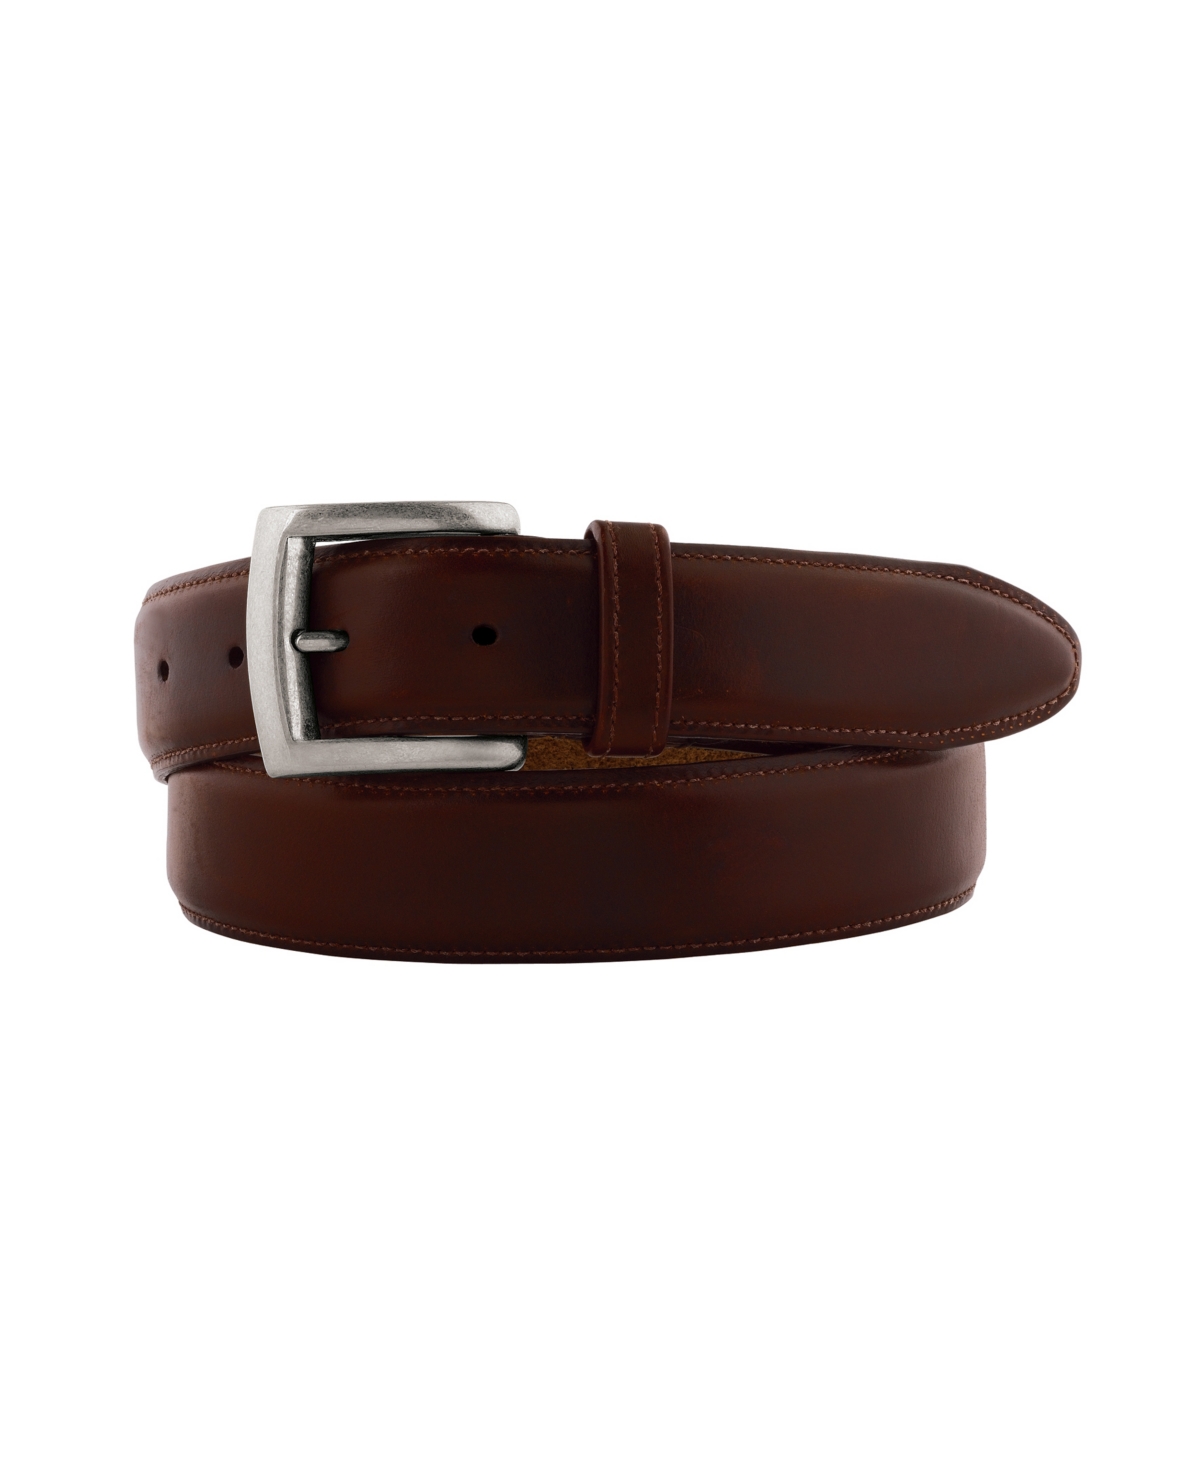 Waxed Leather Belt - Brown